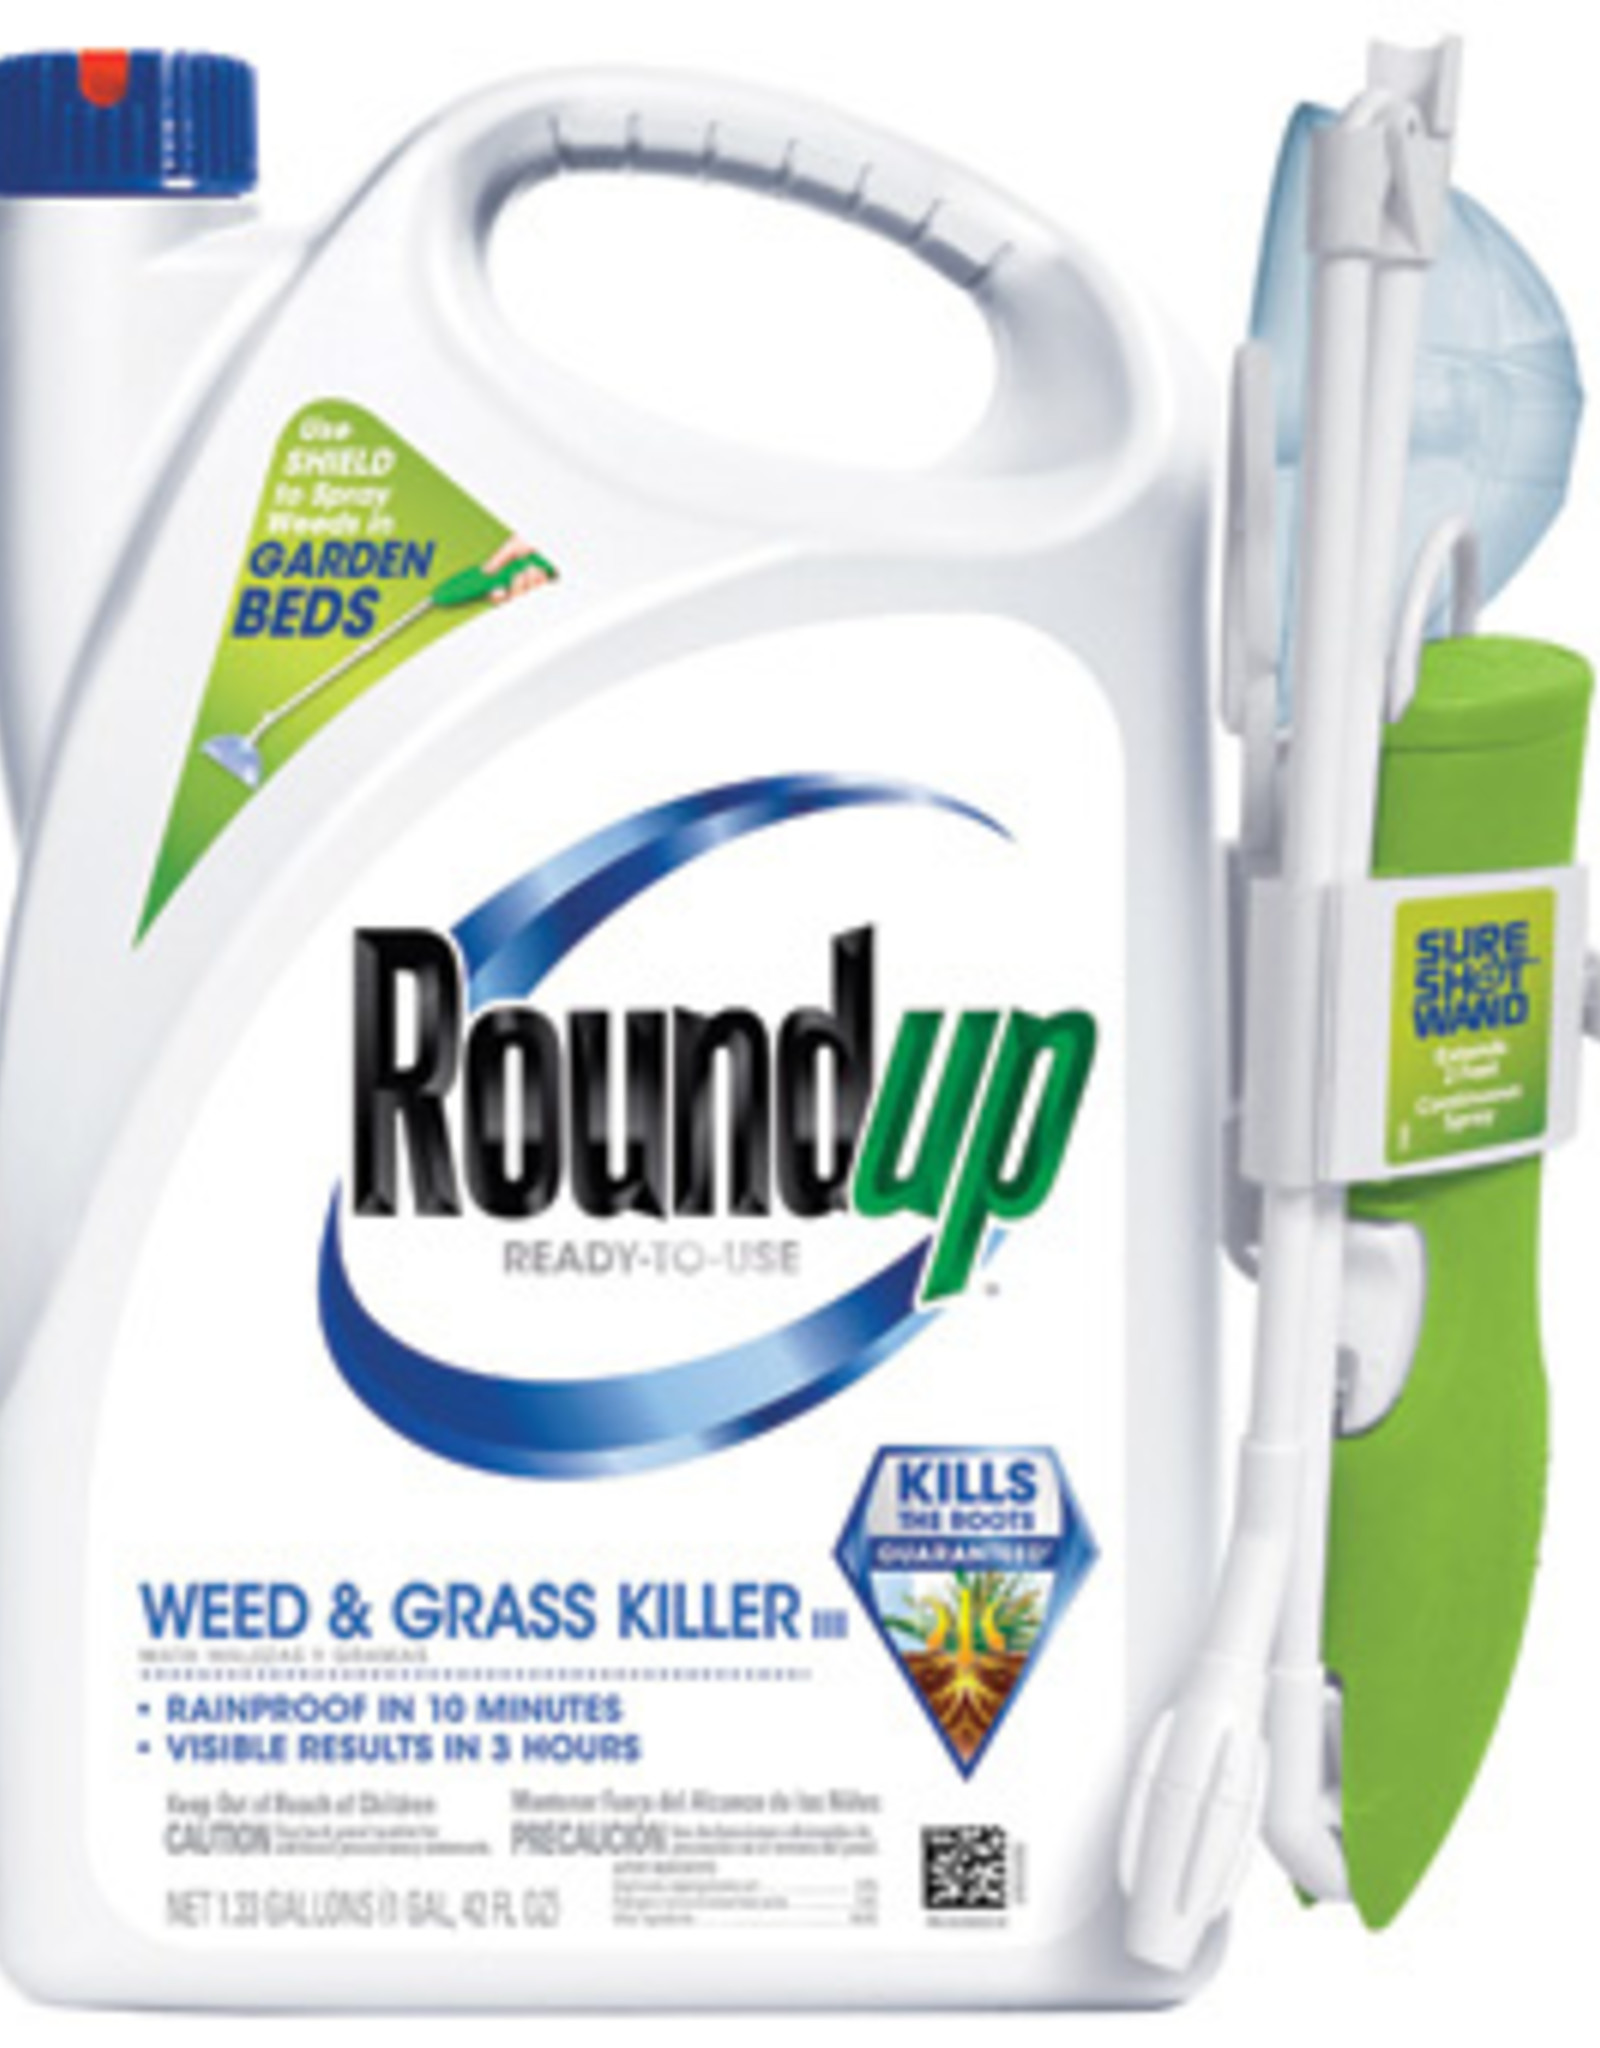 BAYER ROUNDUP WEED & GRASS KILLER SURE SHOT WAND READY-TO-USE 1.33 GAL